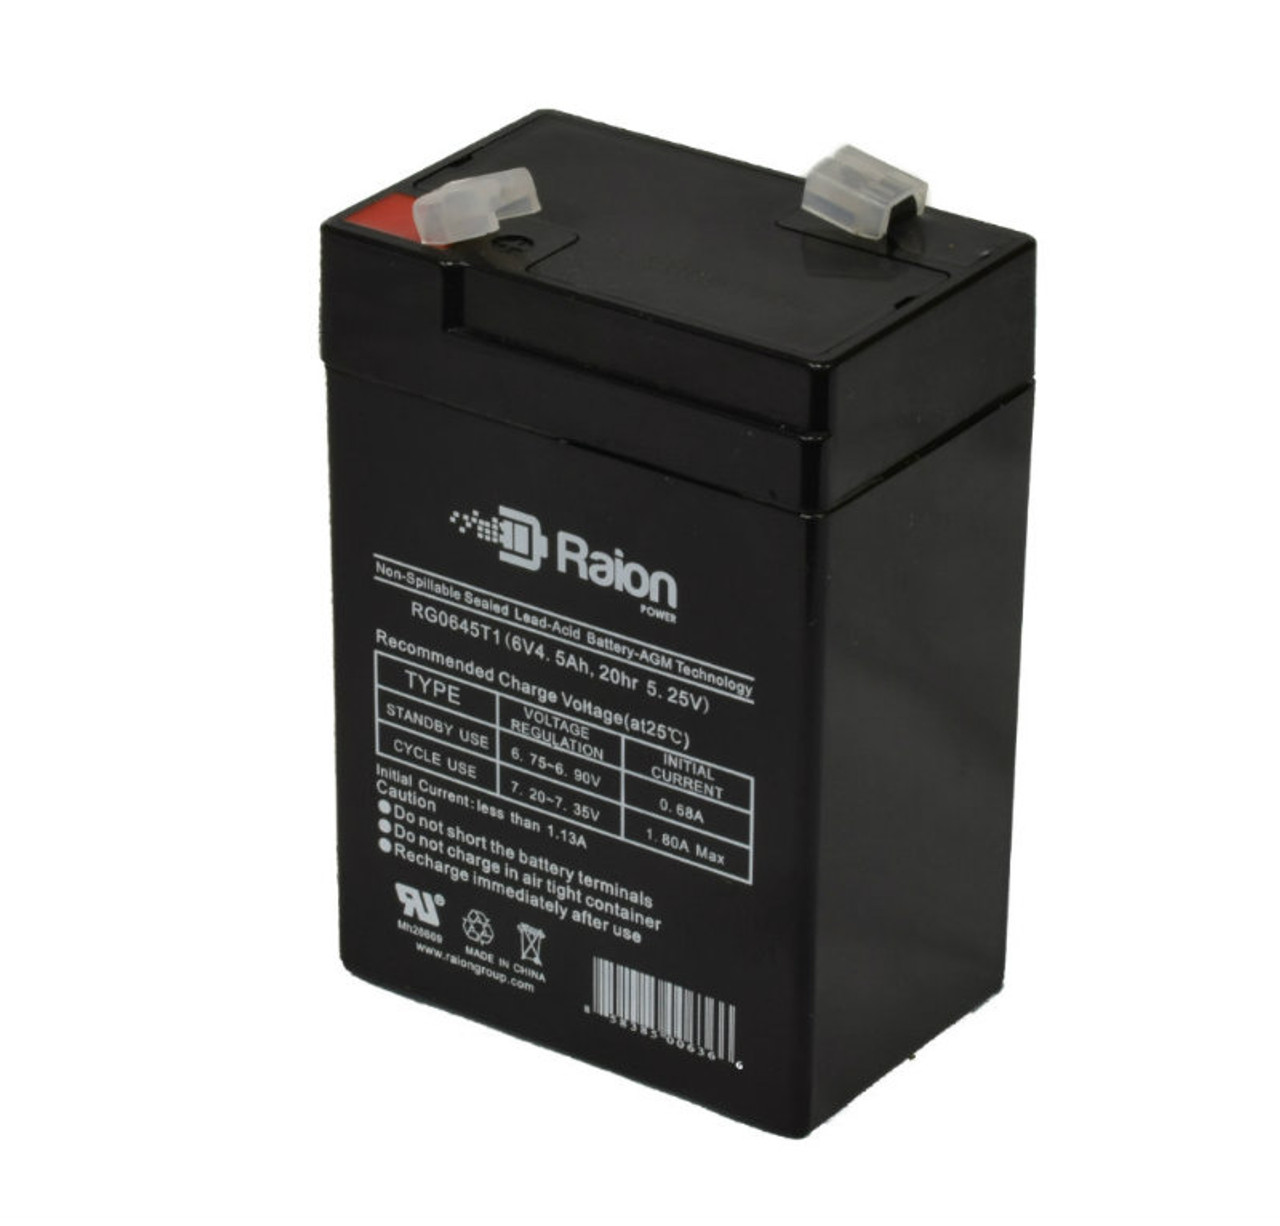 Raion Power RG0645T1 6V 4.5Ah Replacement Battery Cartridge for Light Alarms 5E15BS